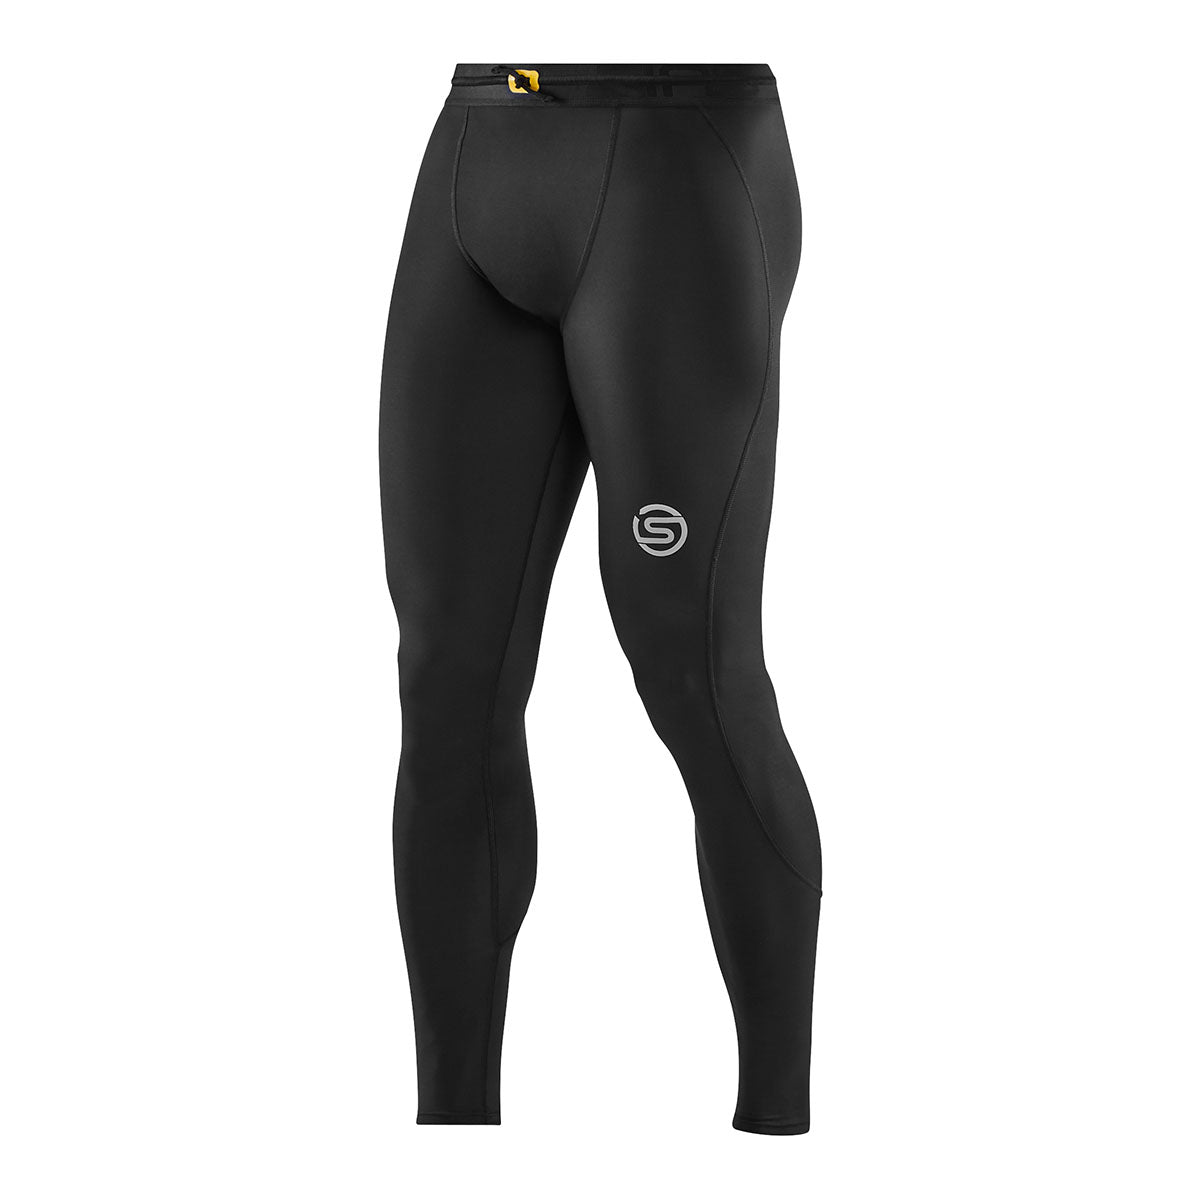 SKINS Women's A400 Compression Review